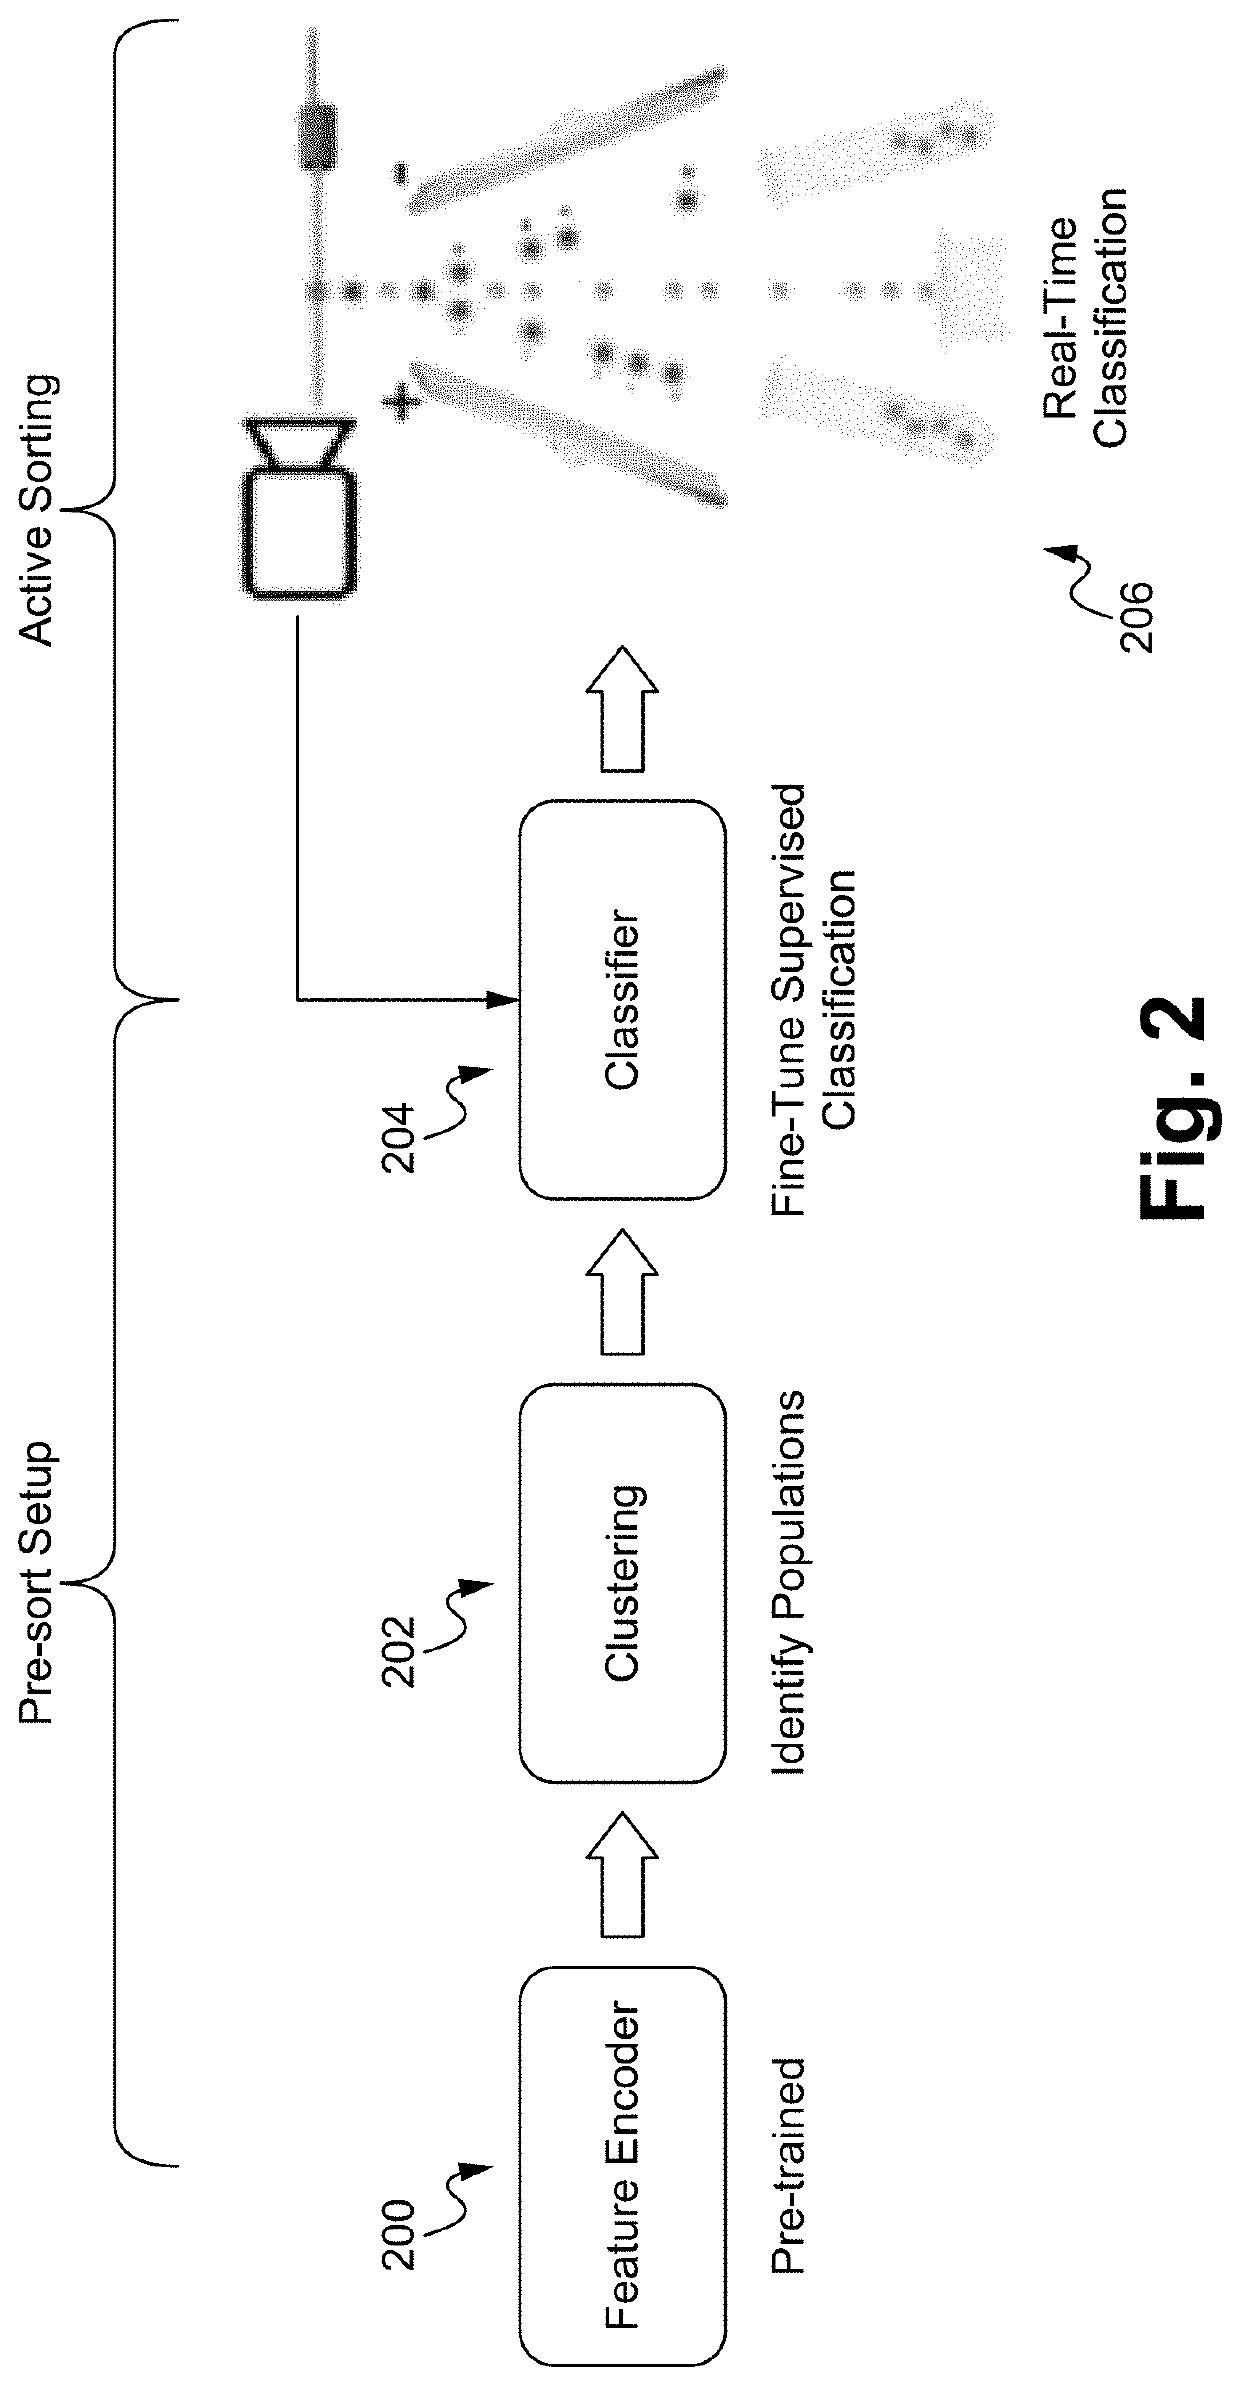 Classification workflow for flexible image based particle sorting